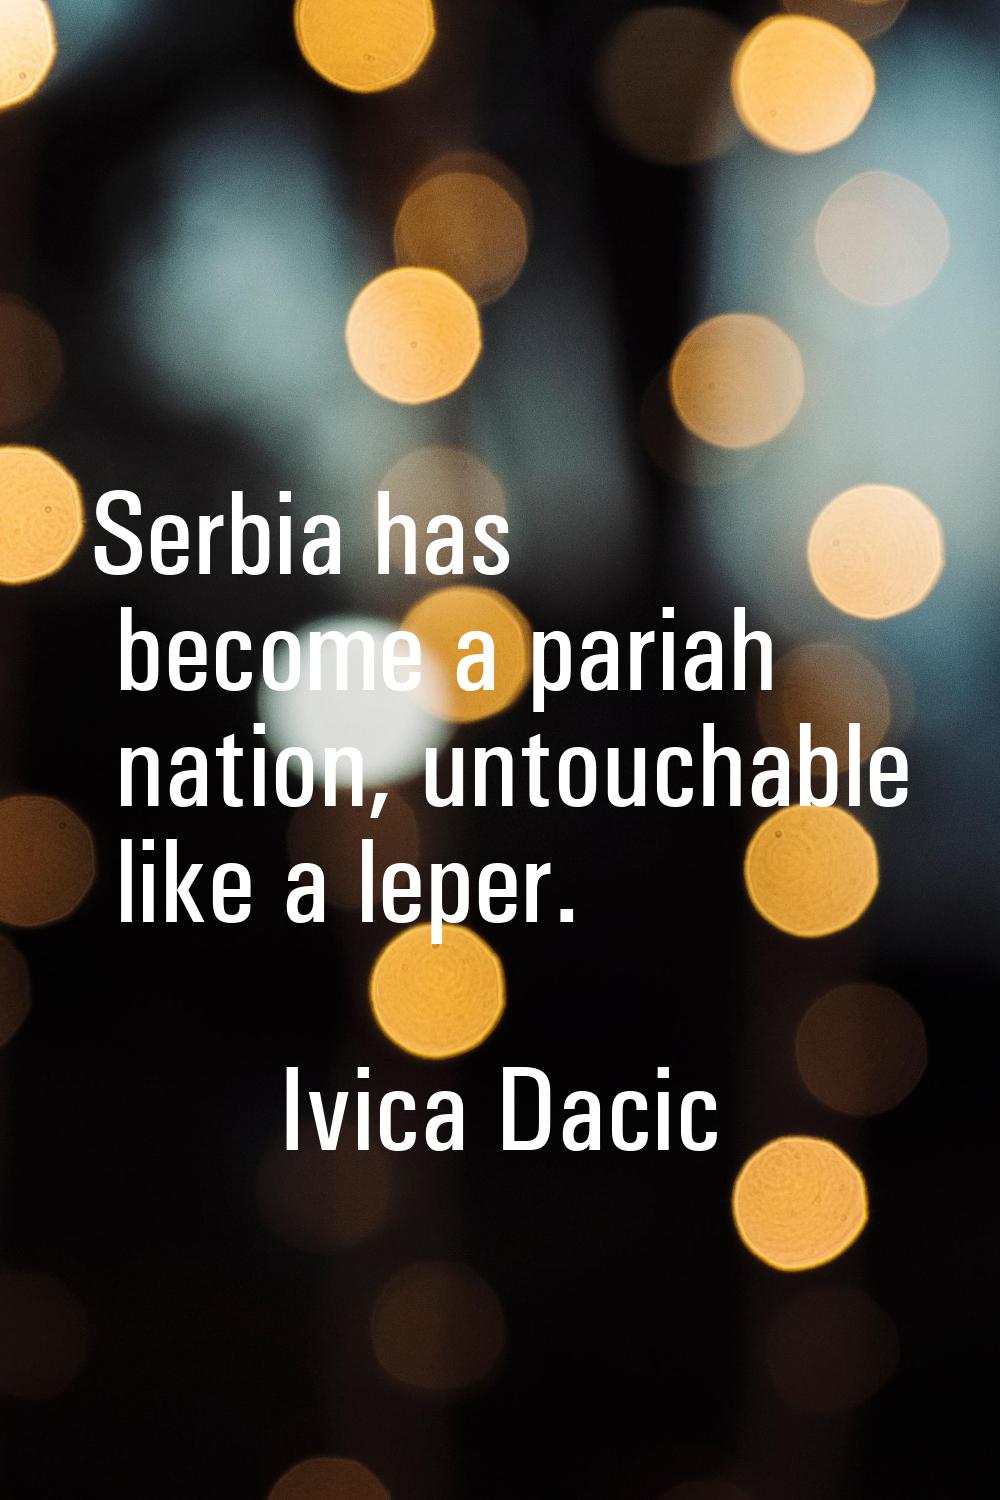 Serbia has become a pariah nation, untouchable like a leper.